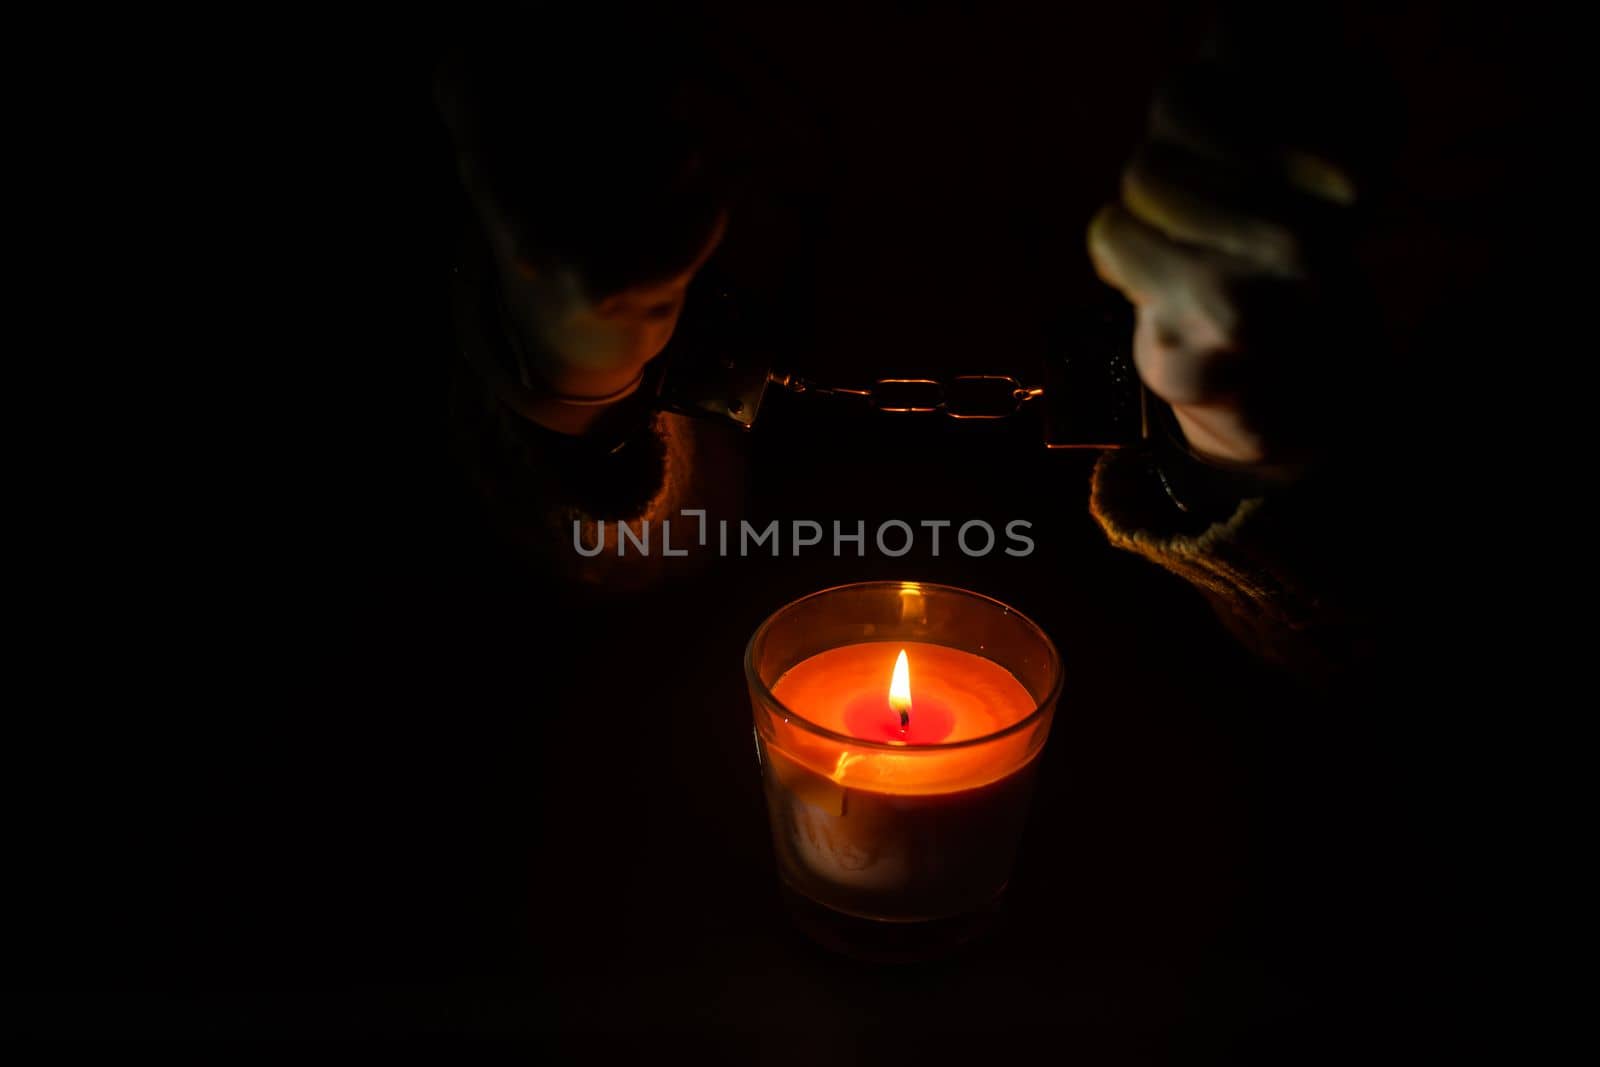 composition with the toy handcuffs, candle